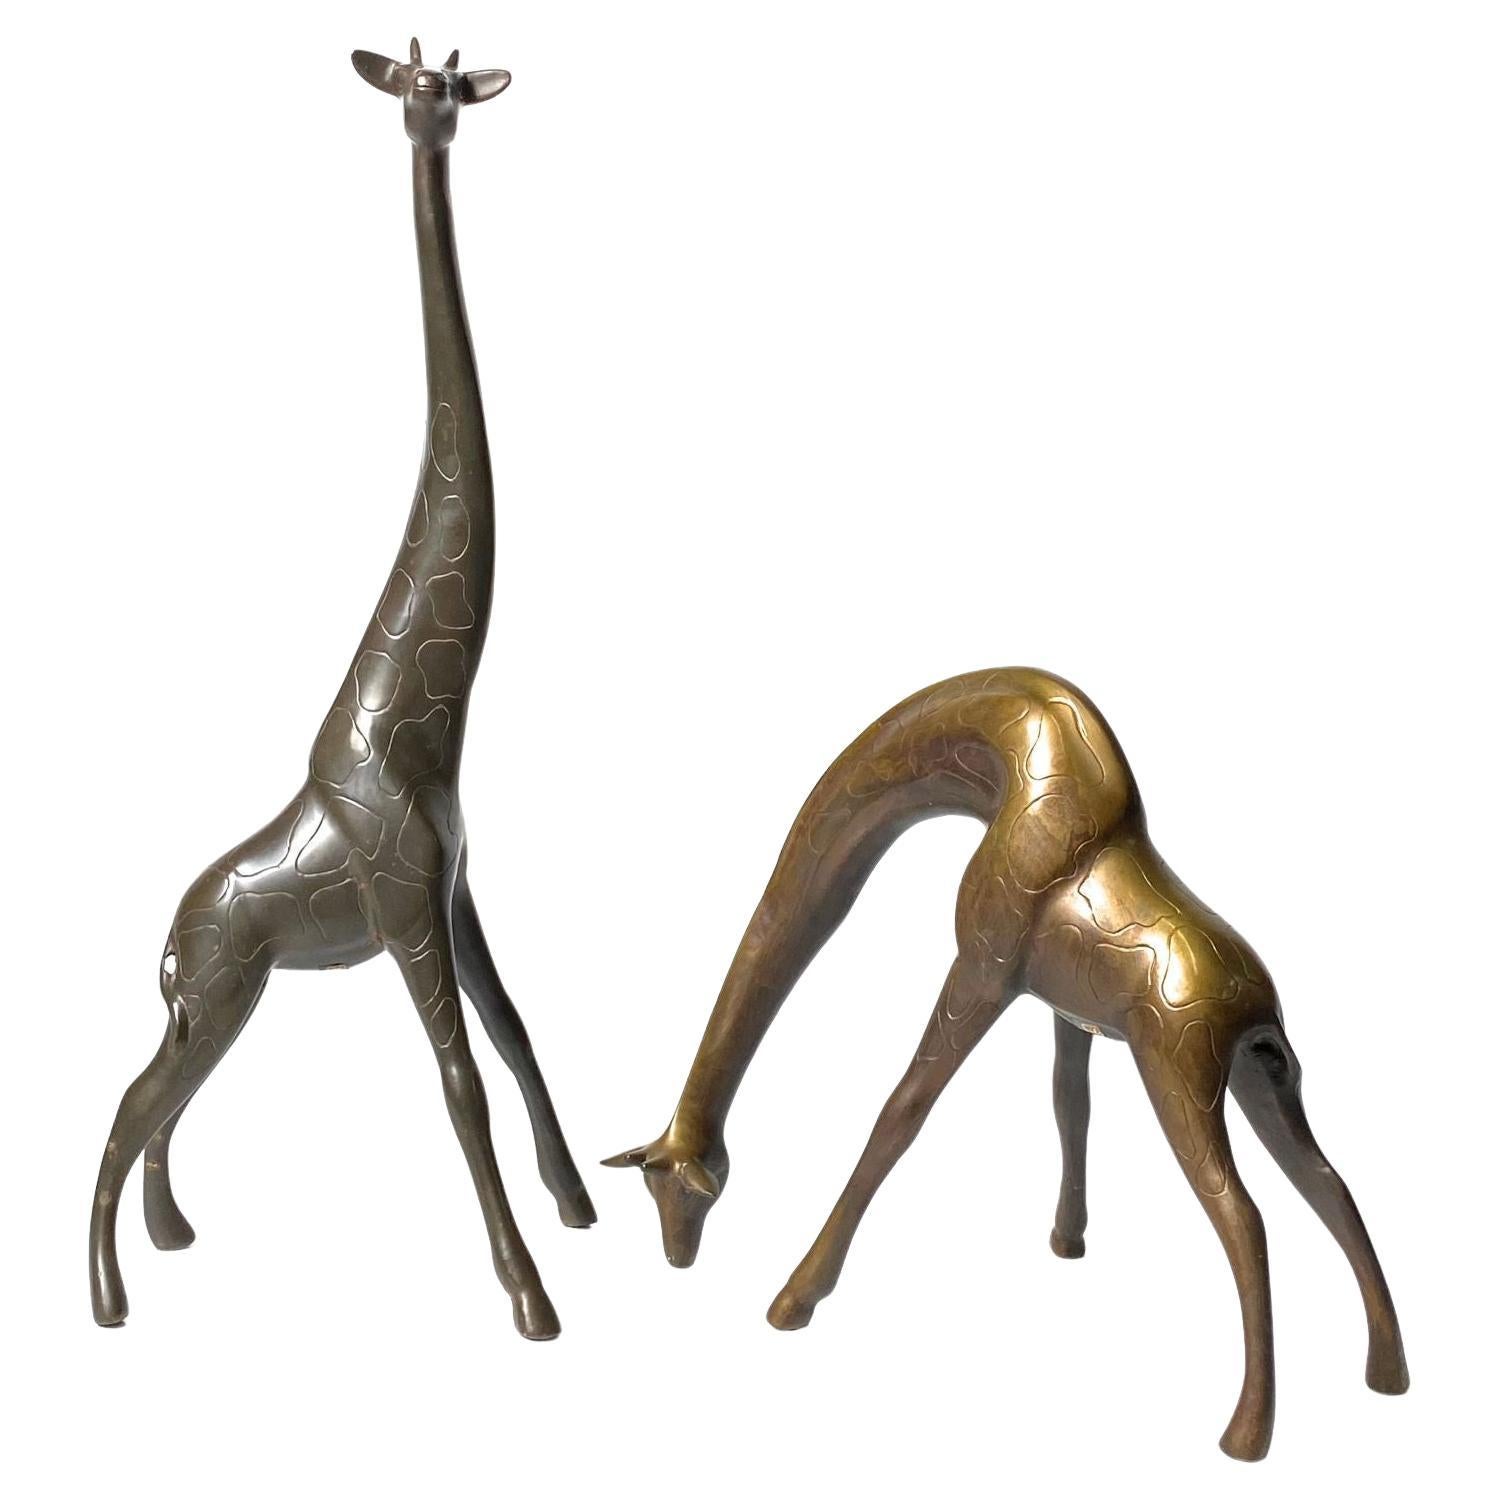 Pair of Vintage Giraffe Sculptures in Bronze and Brass, circa 1970s For Sale